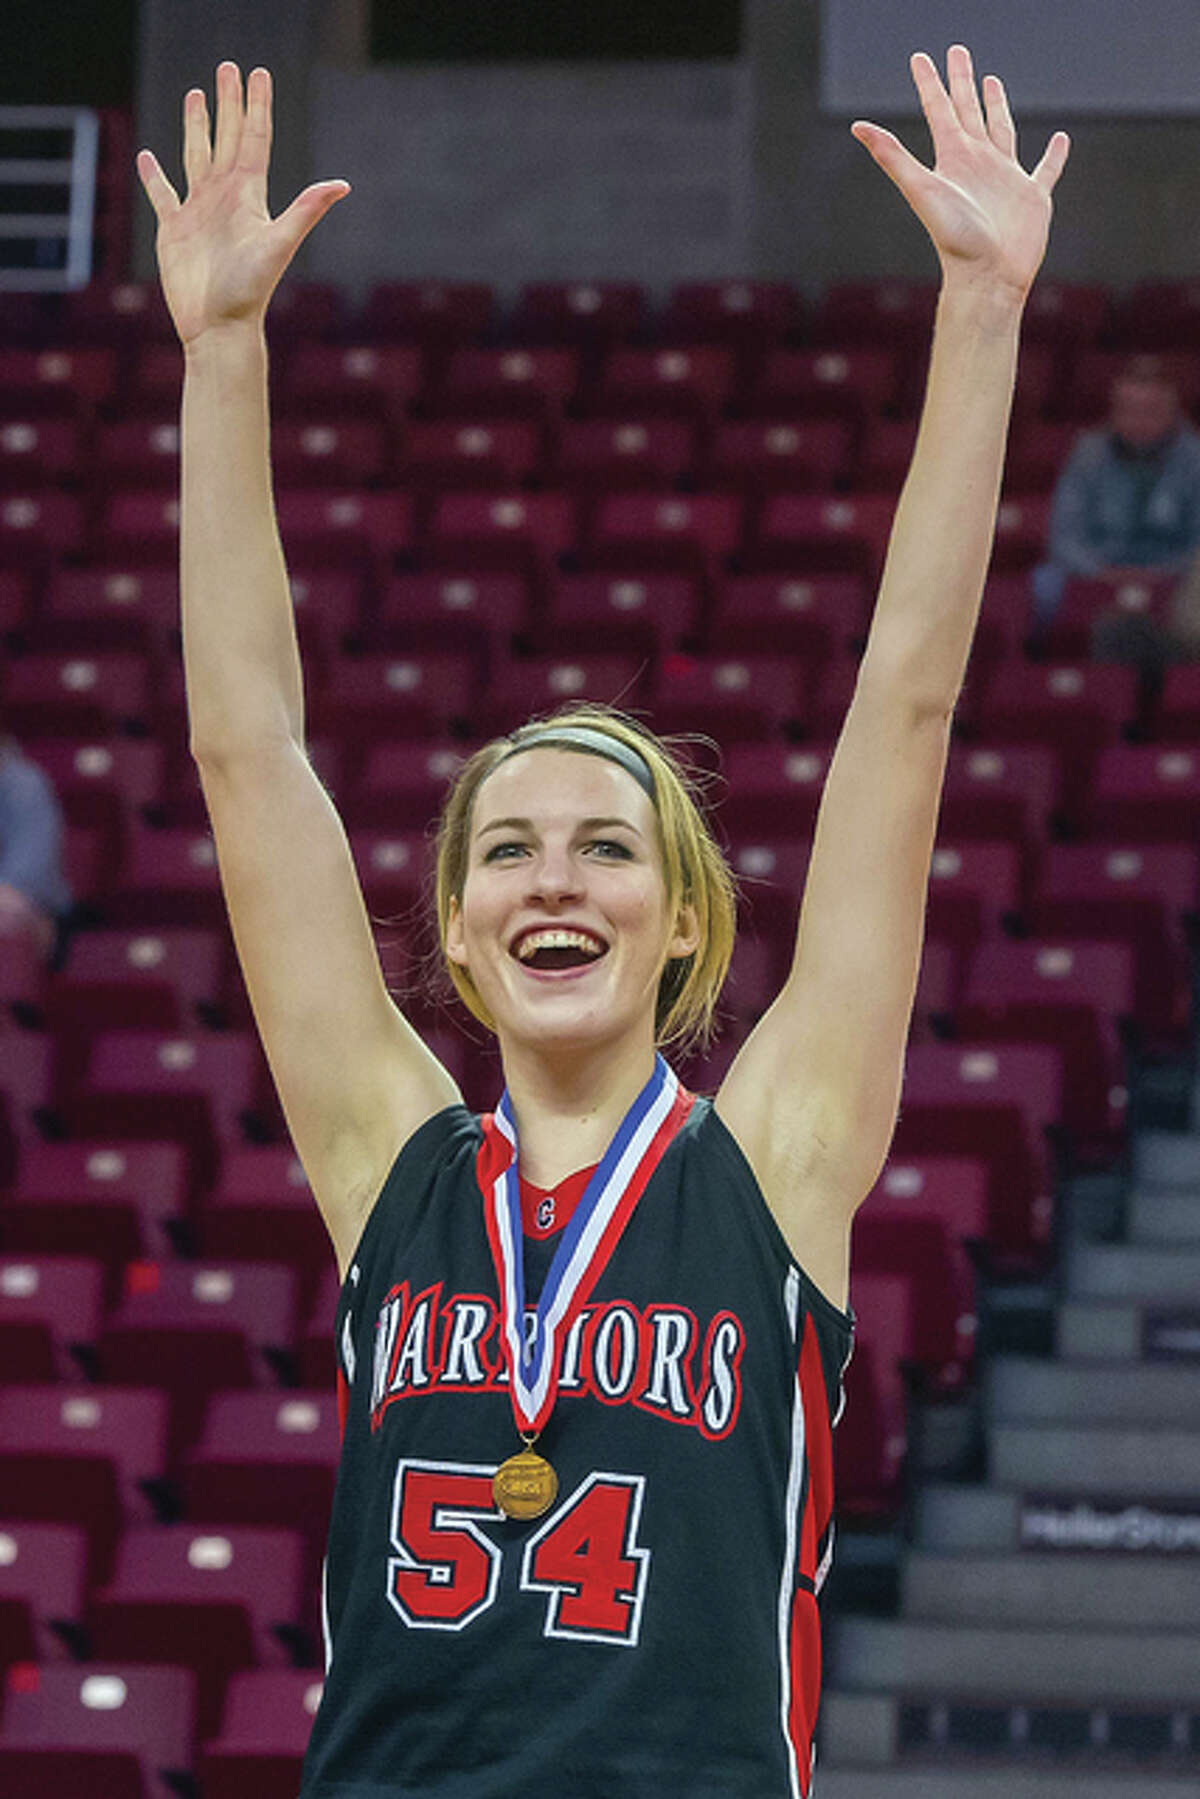 Calhoun’s Grace Baalman celebrates after receiving her state championship medal Saturday in Normal. She scored 17 points and helped the Warriors to a 60-56 win over Mowequa Central A&M in the Class 1A state championship game at Redbird Arena.